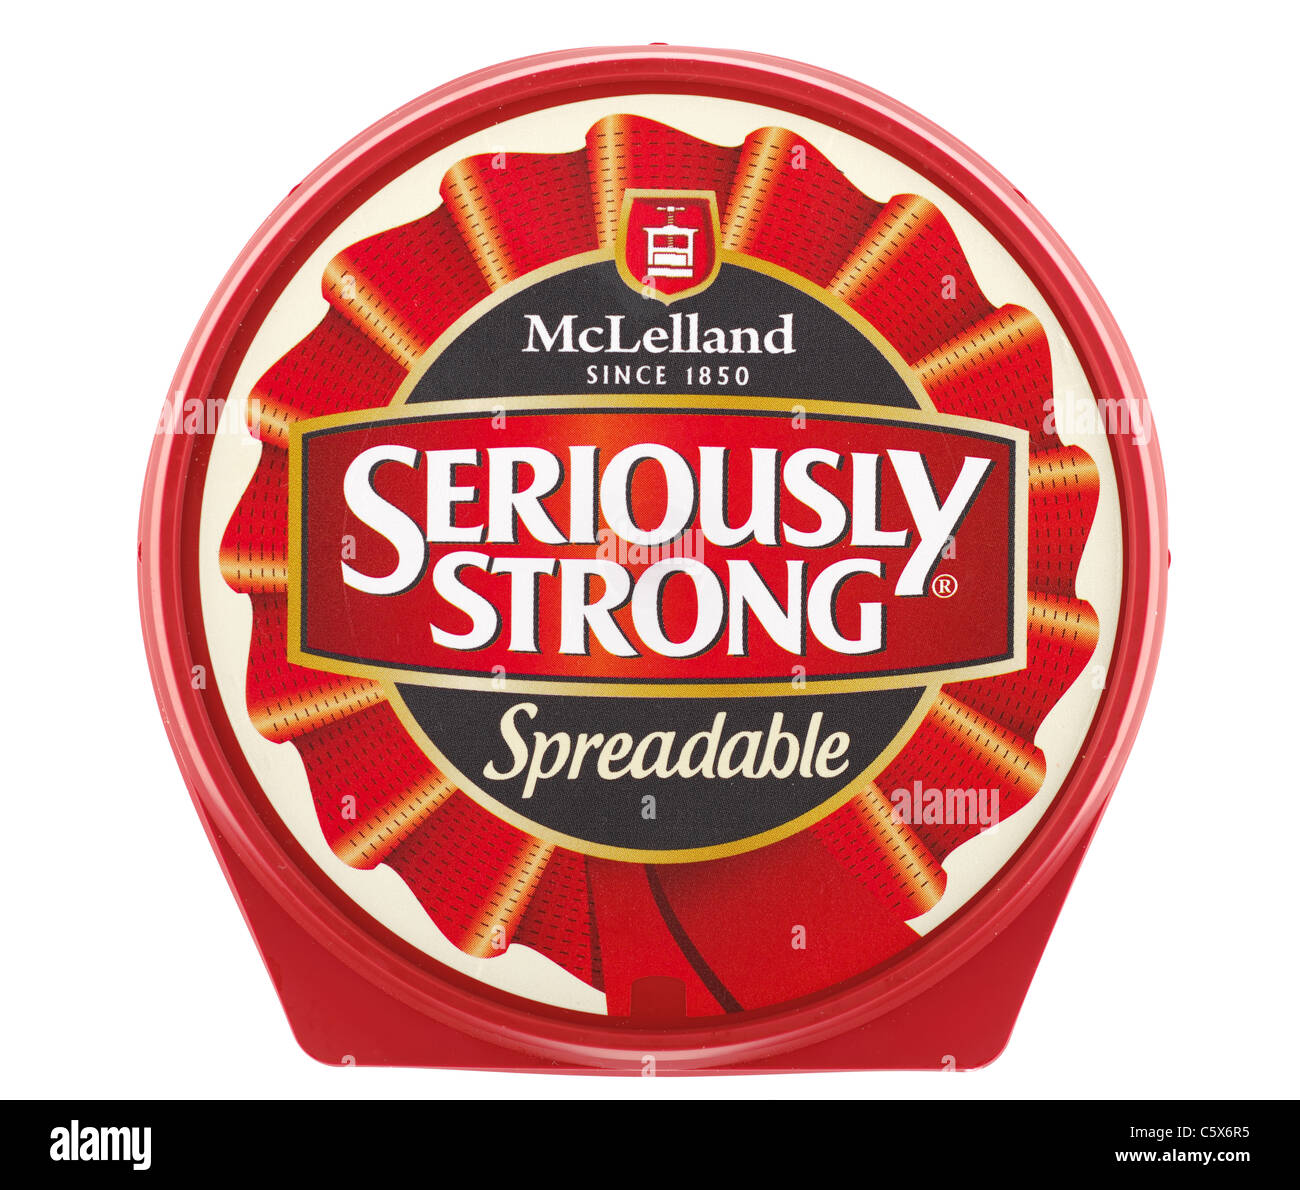 Tub of Spreadable Seriously Strong McLelland cheese spread. Stock Photo